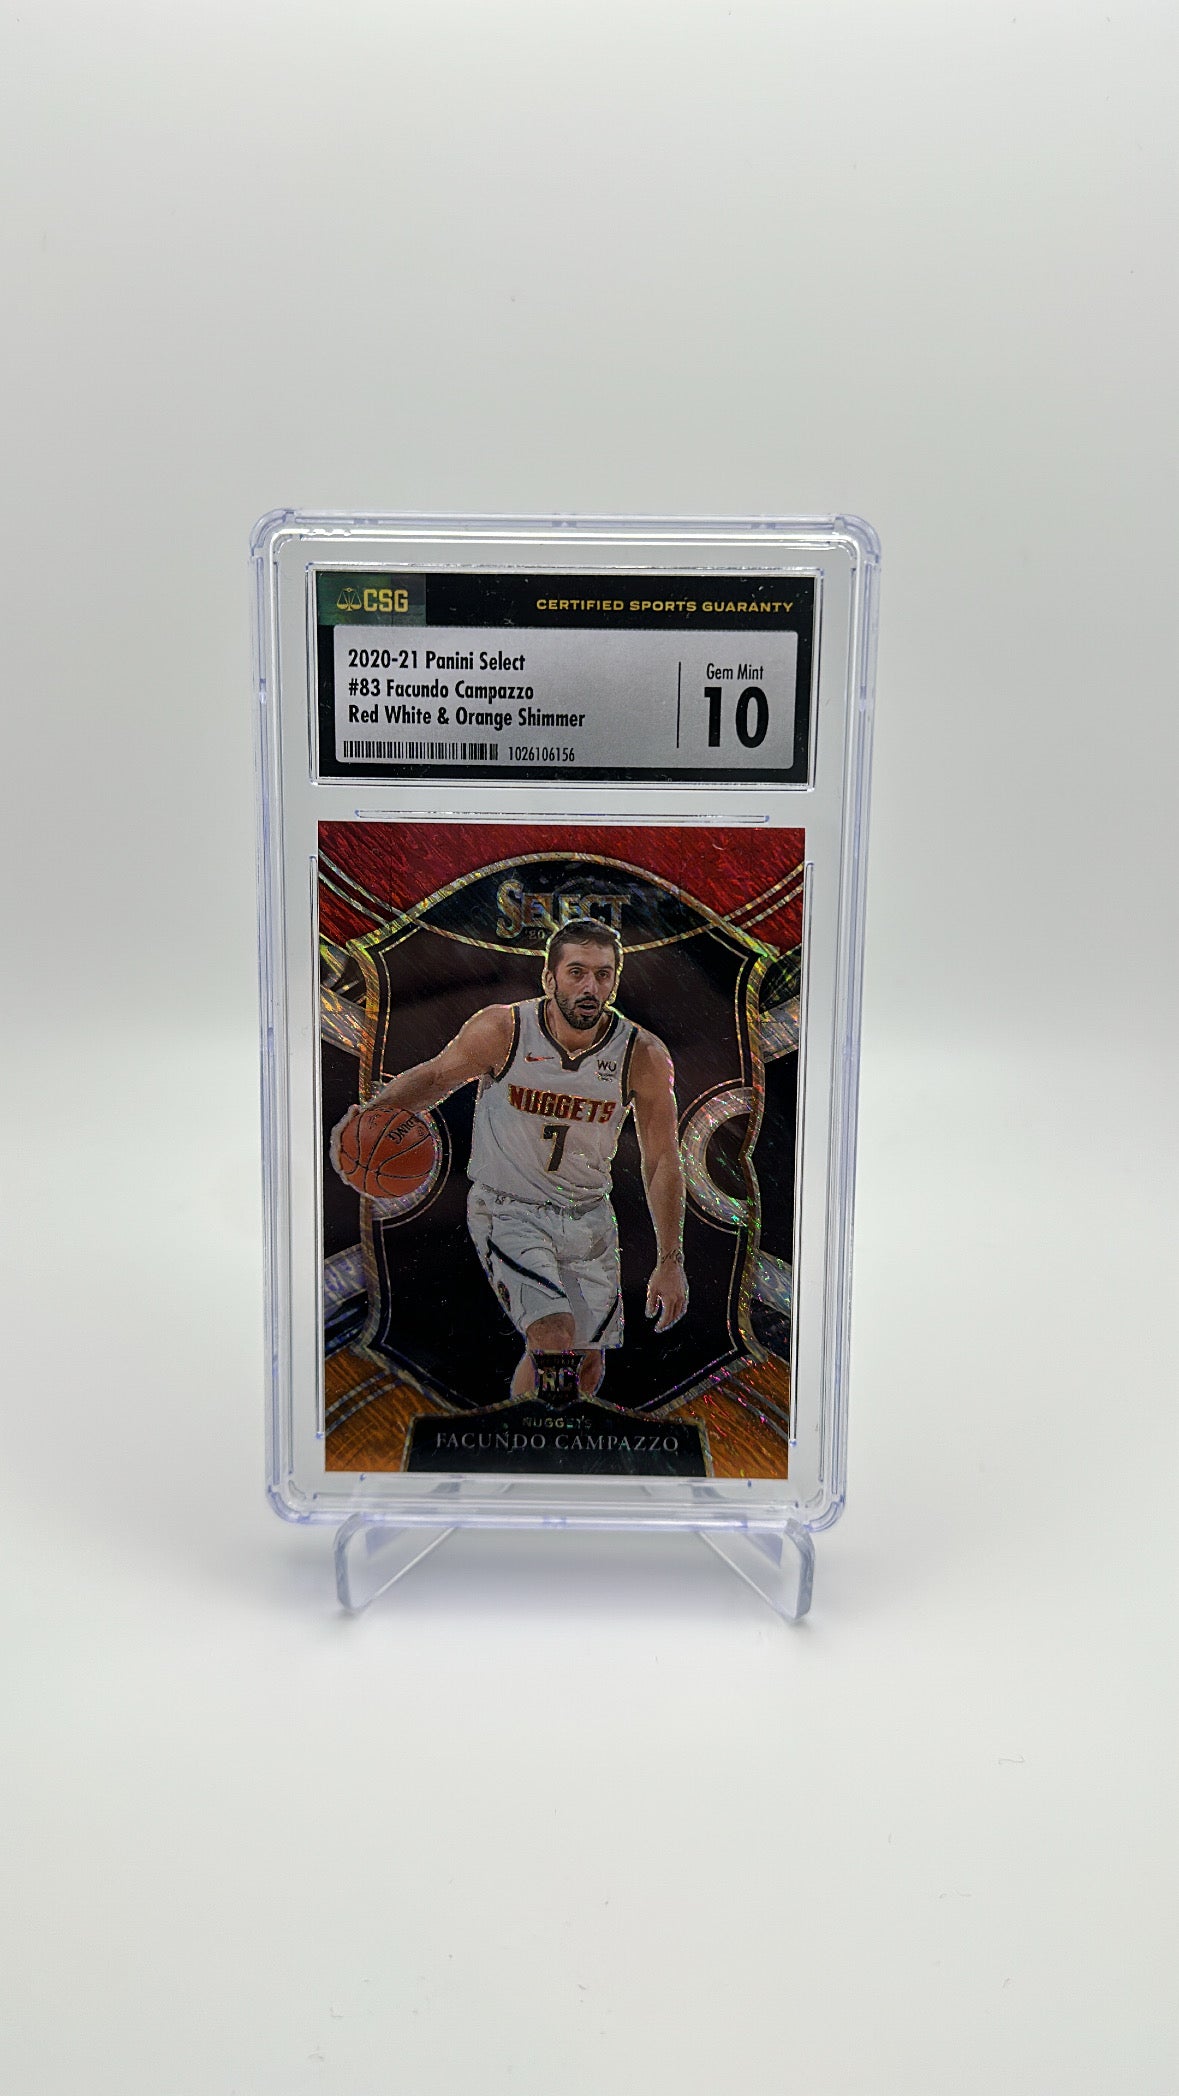 2020-21 Panini Select - Facundo Campazzo 83 - Red White and Orange Shimmer - CSG CGC 10